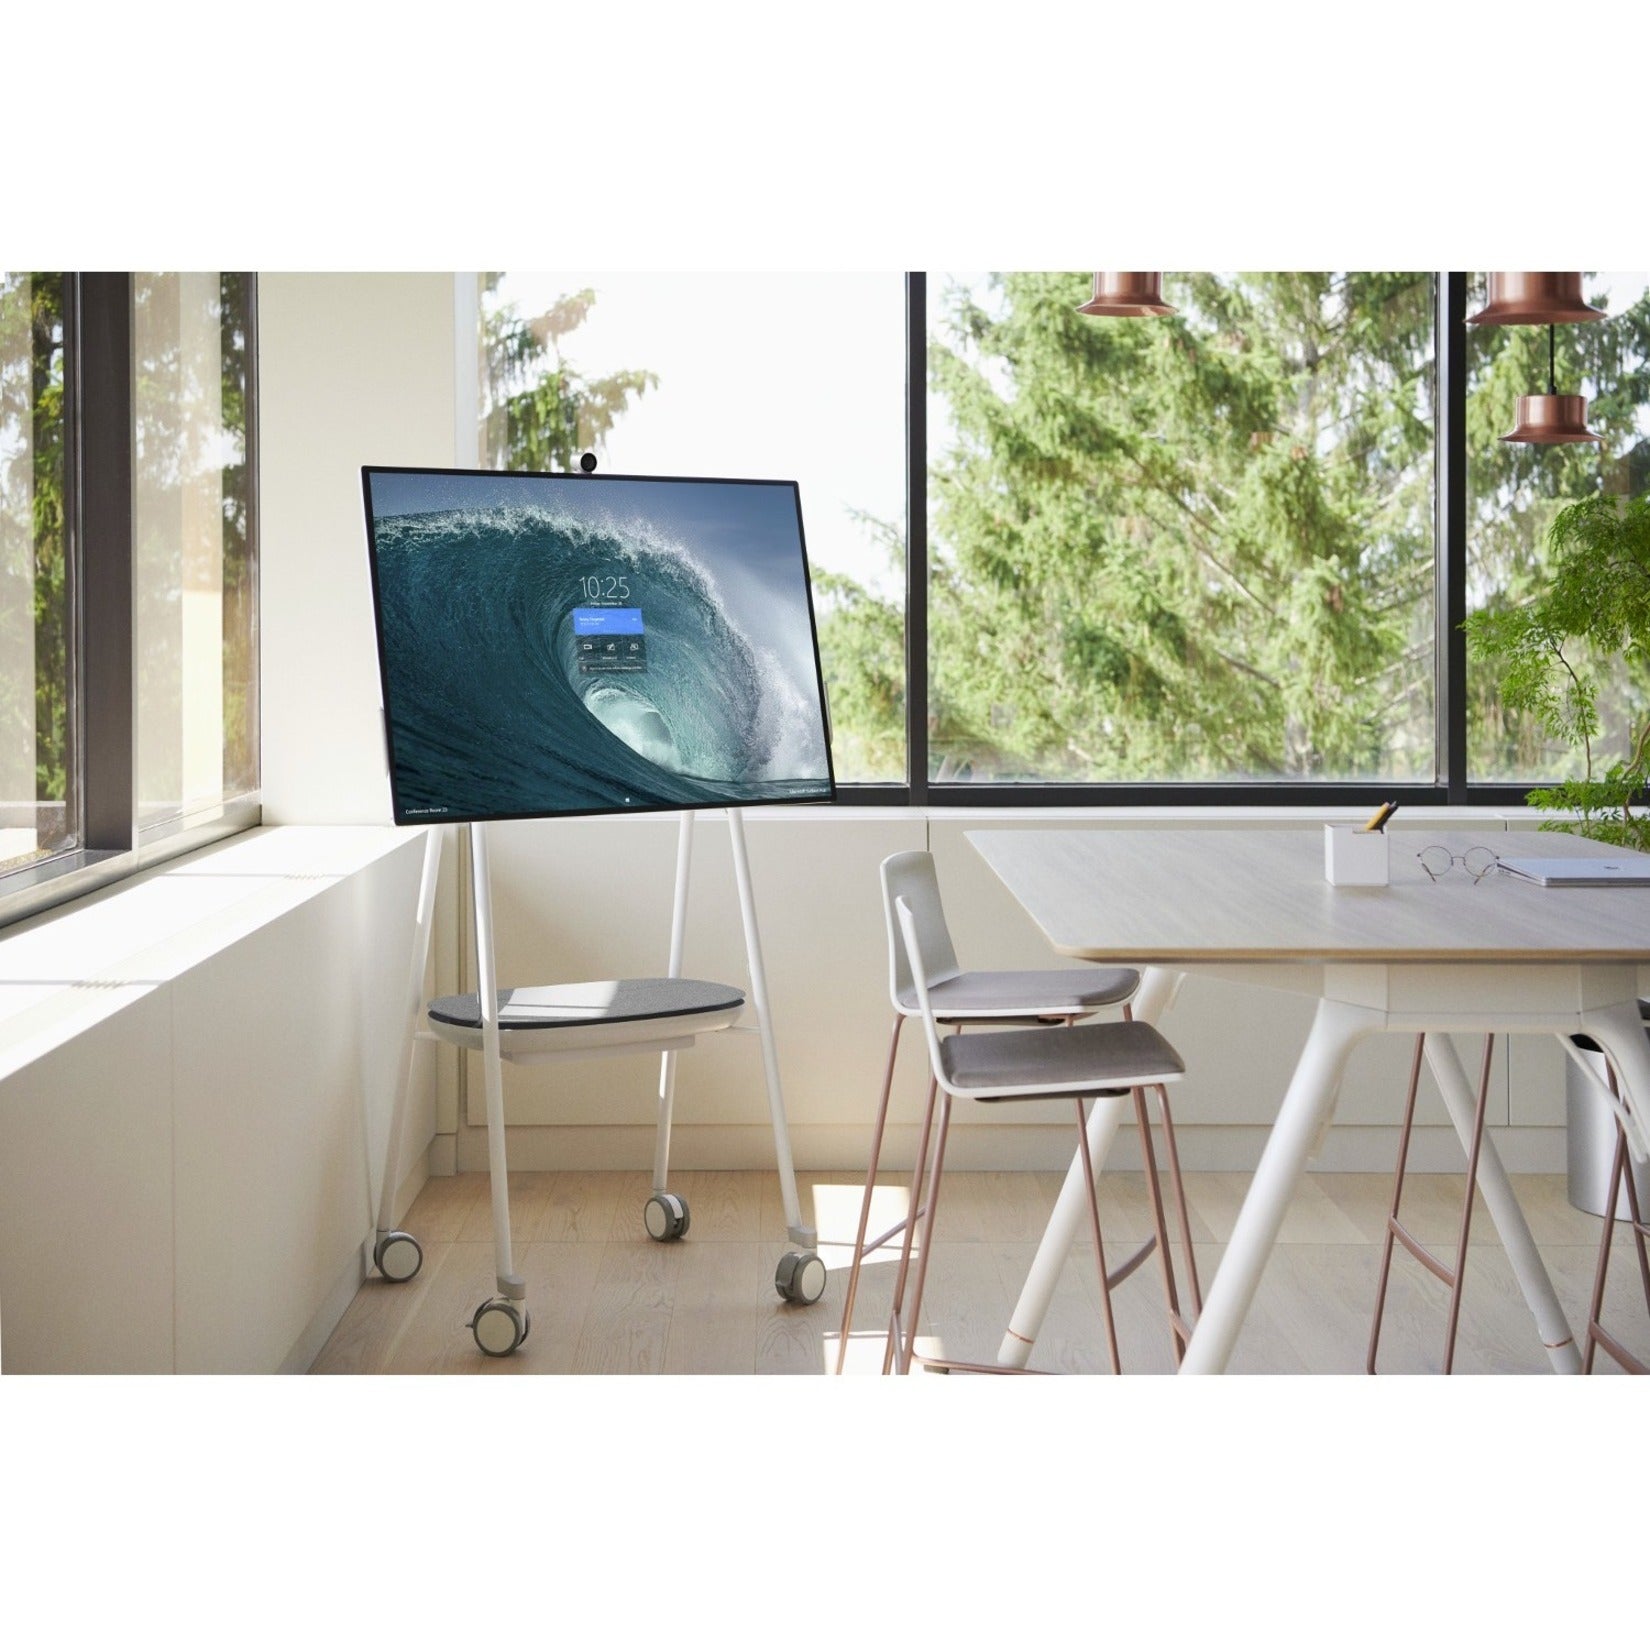 Microsoft 7B4-00002 Surface Hub 2S, 85" 4K UHD Touchscreen All-in-One Computer